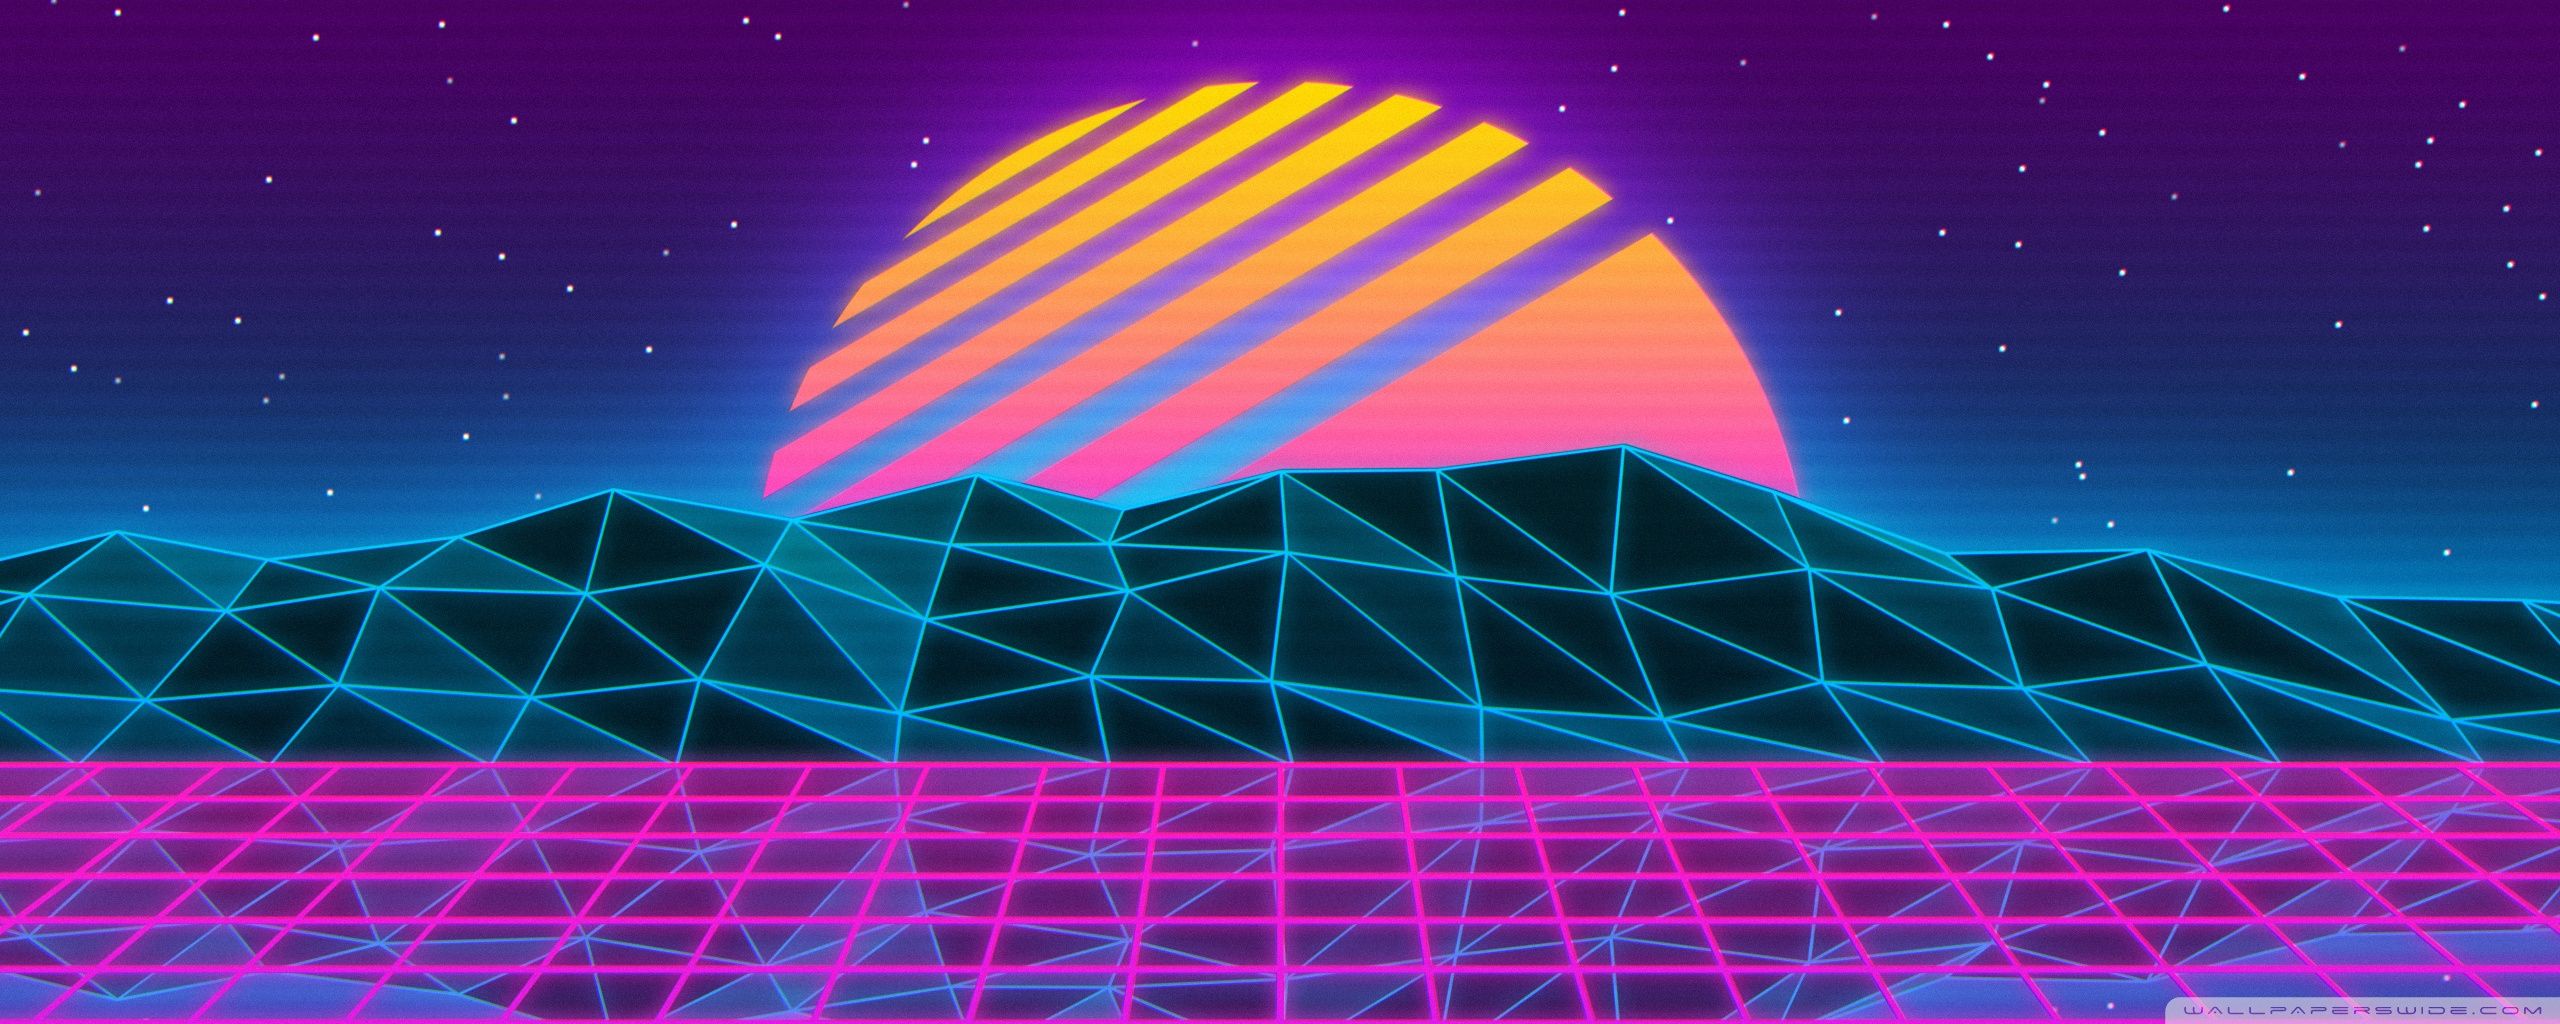 A retro style image with mountains and neon colors - Vaporwave